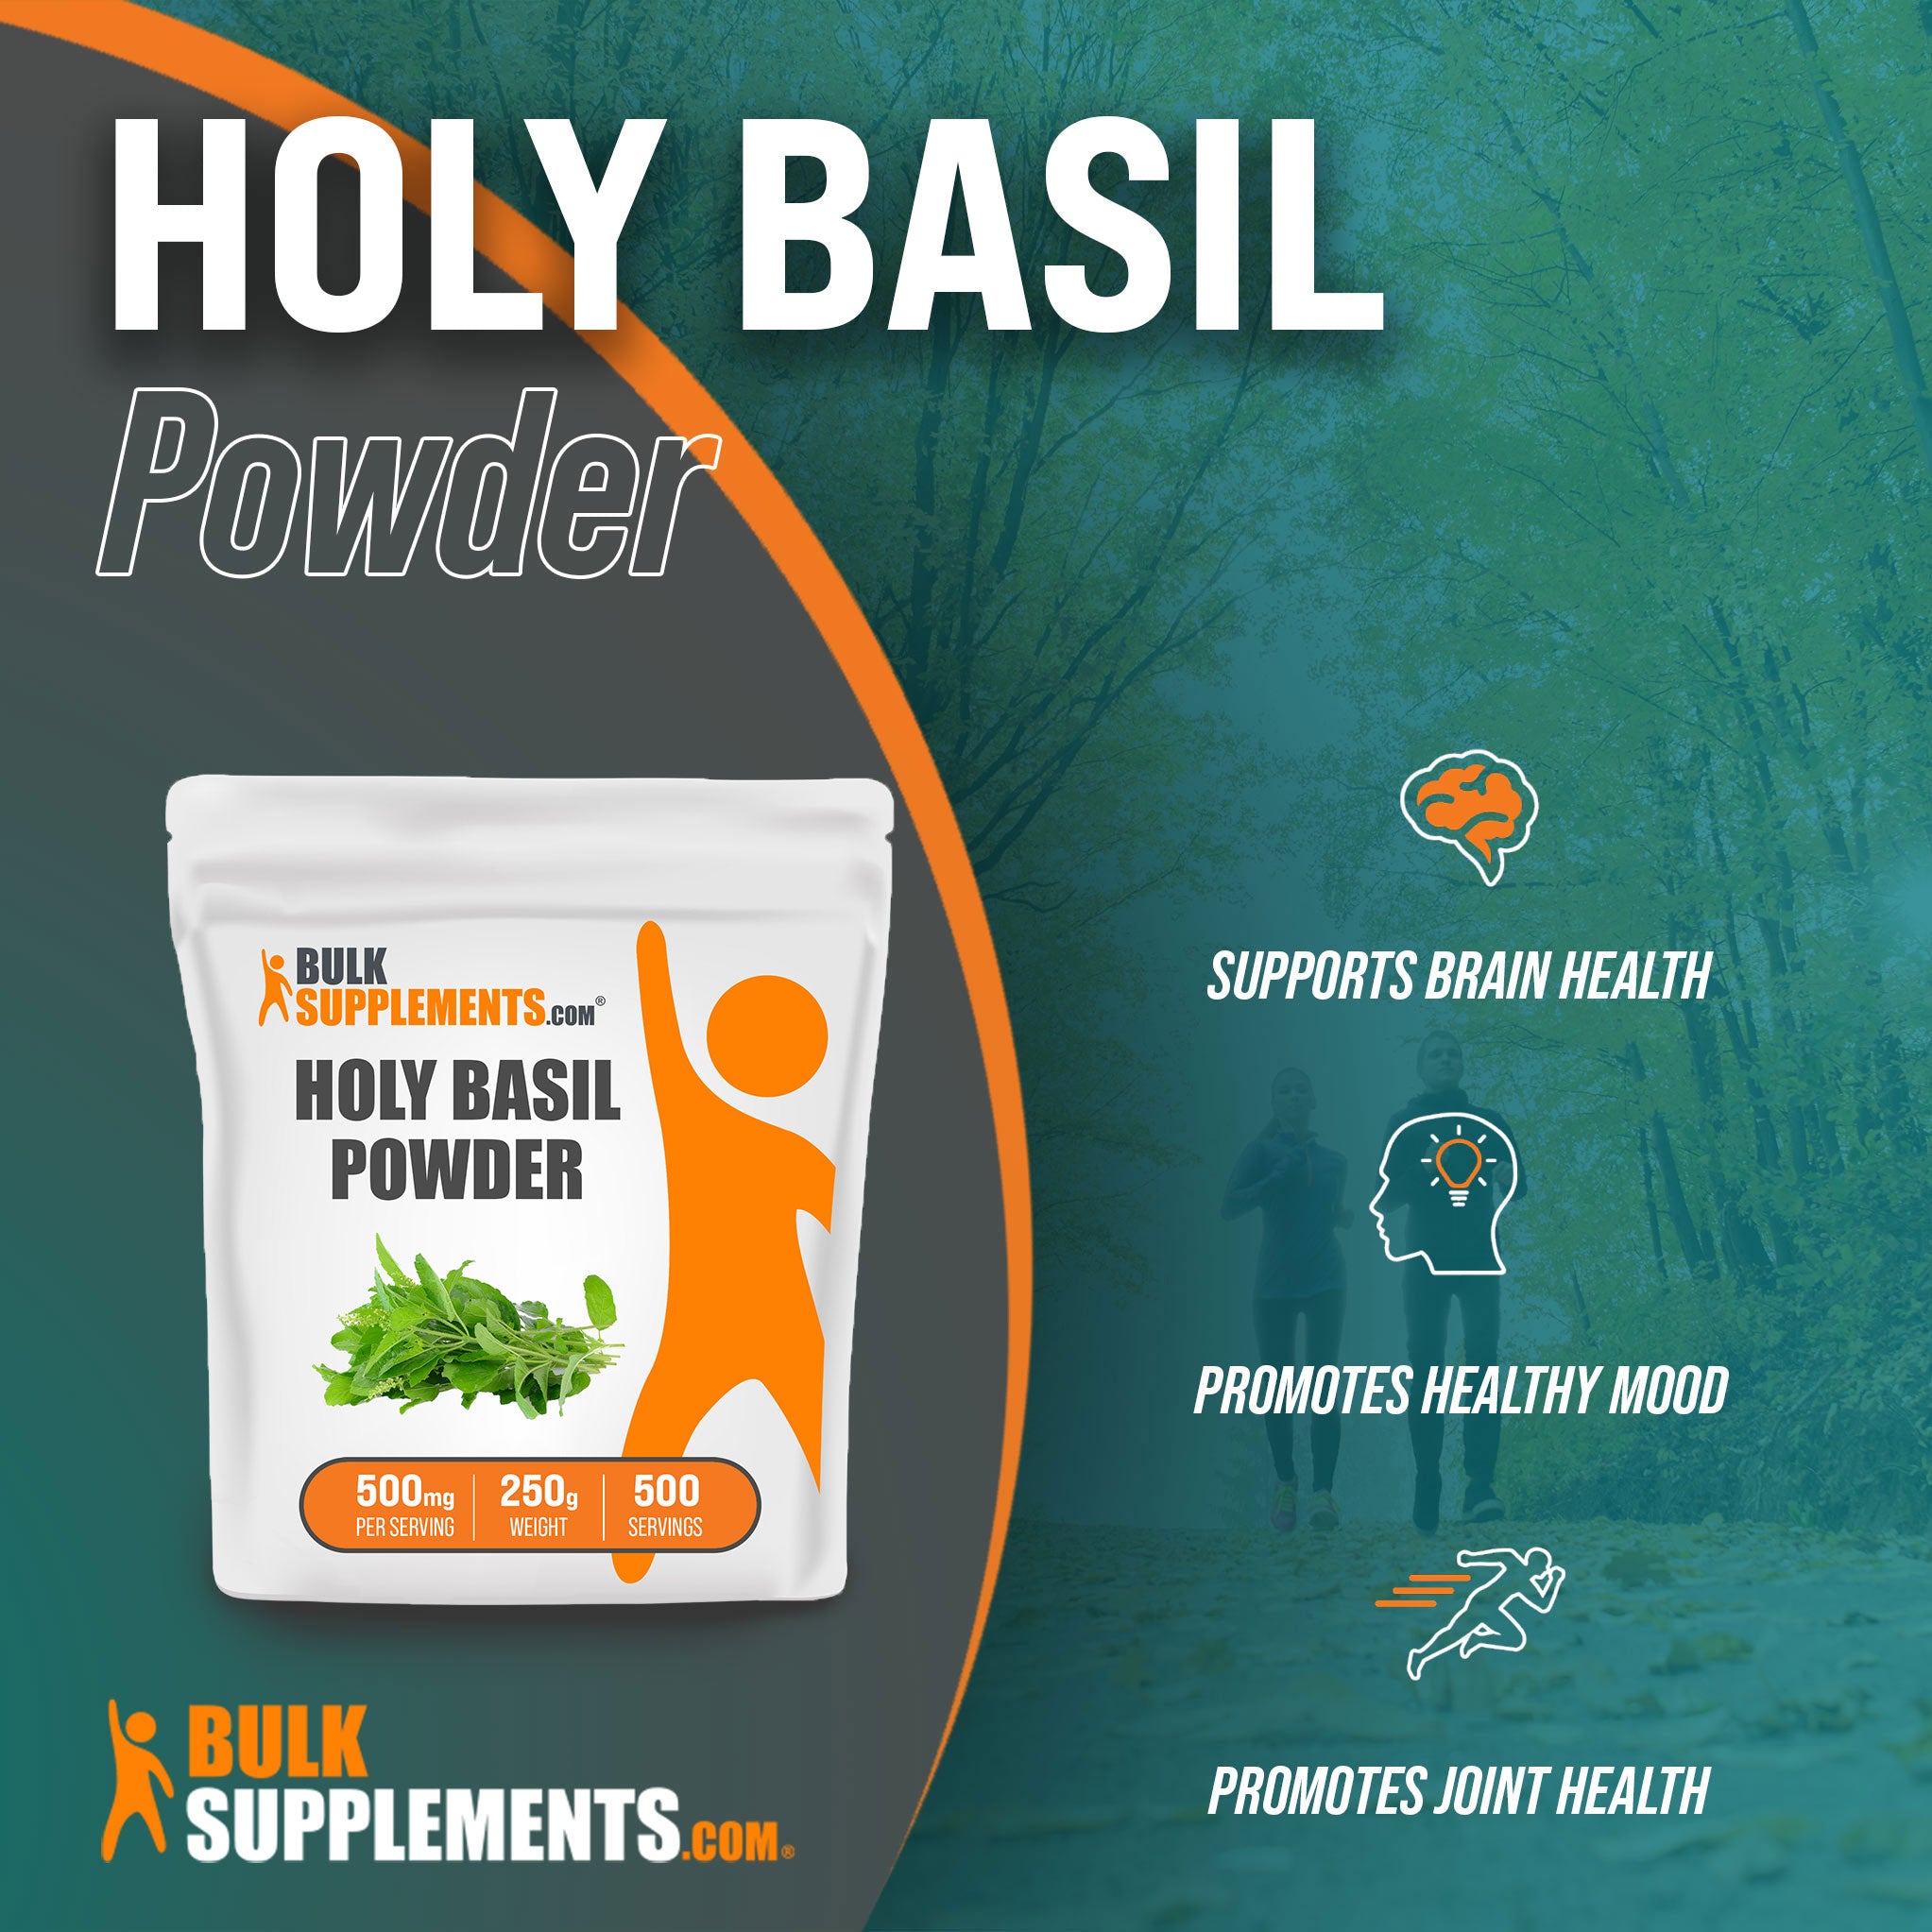 Benefits of Holy Basil Powder; supports brain health, promotes healthy mood, promotes joint health